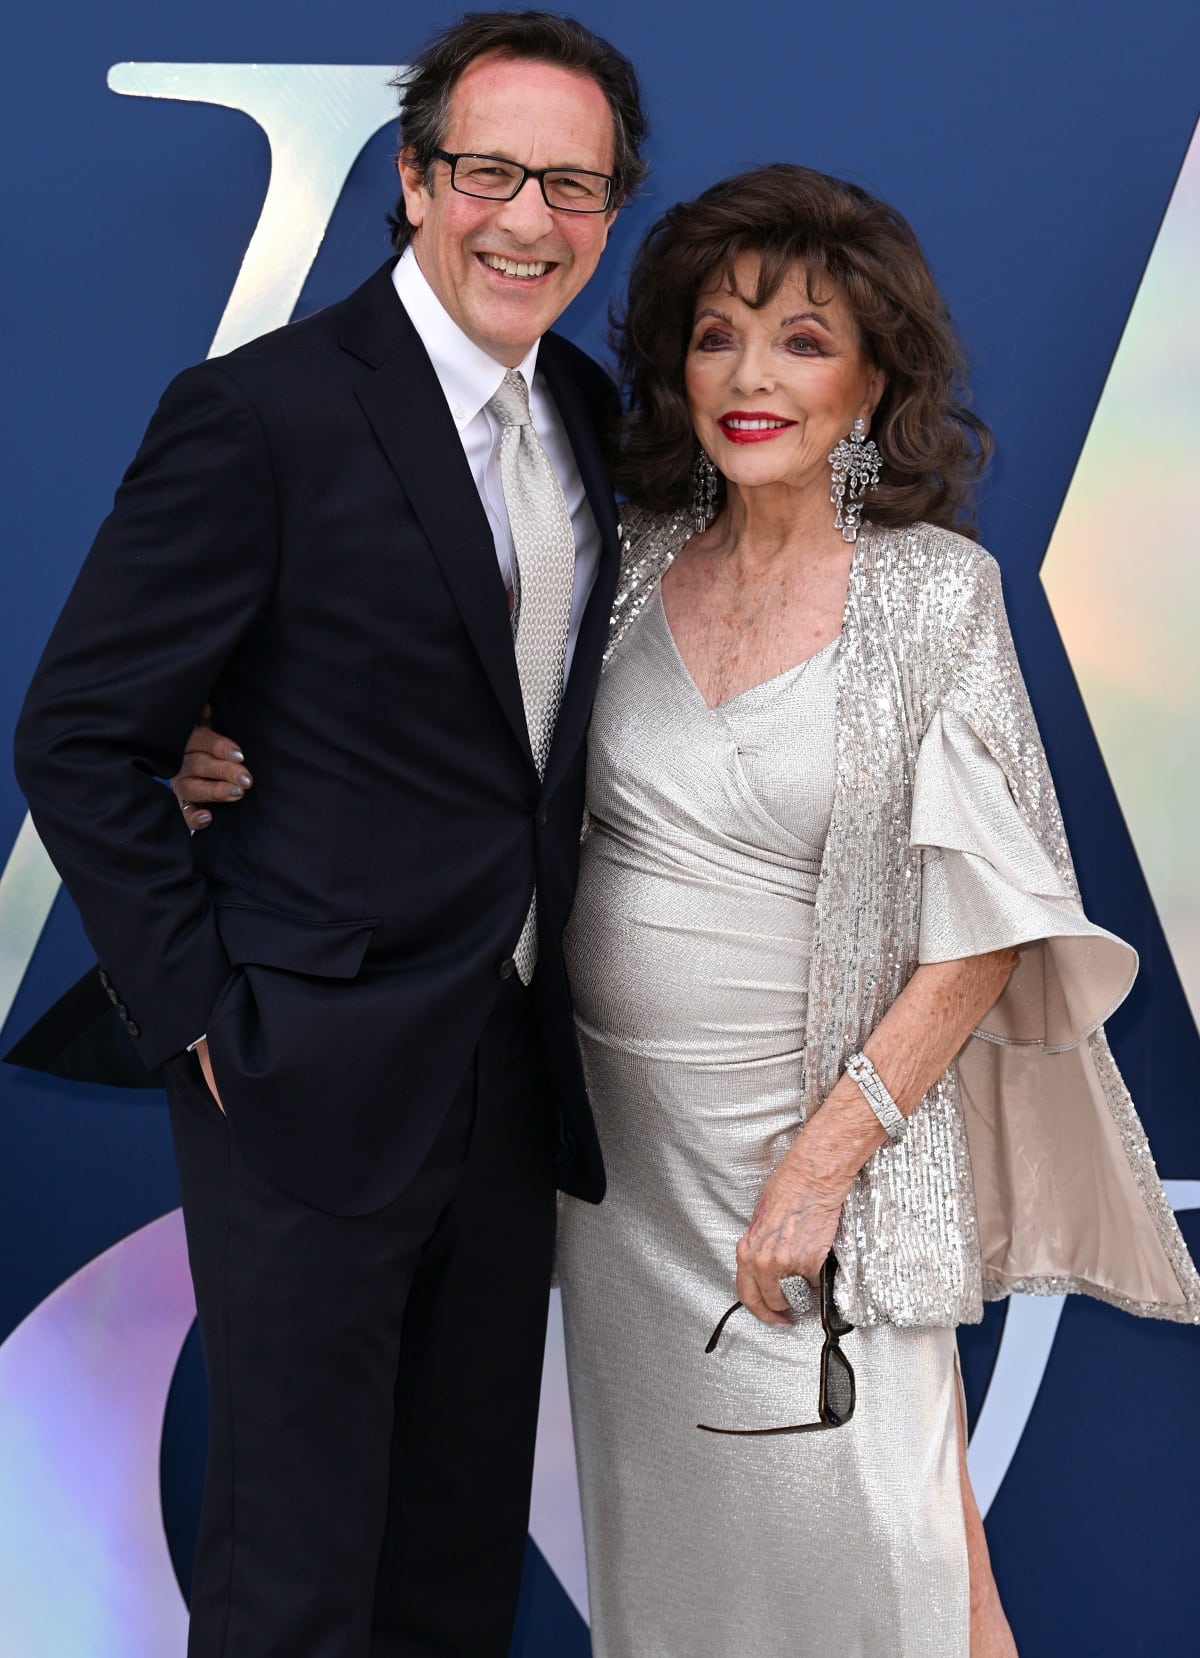 Percy Gibson and Dame Joan Collins showcasing their enduring partnership and long-lasting marriage